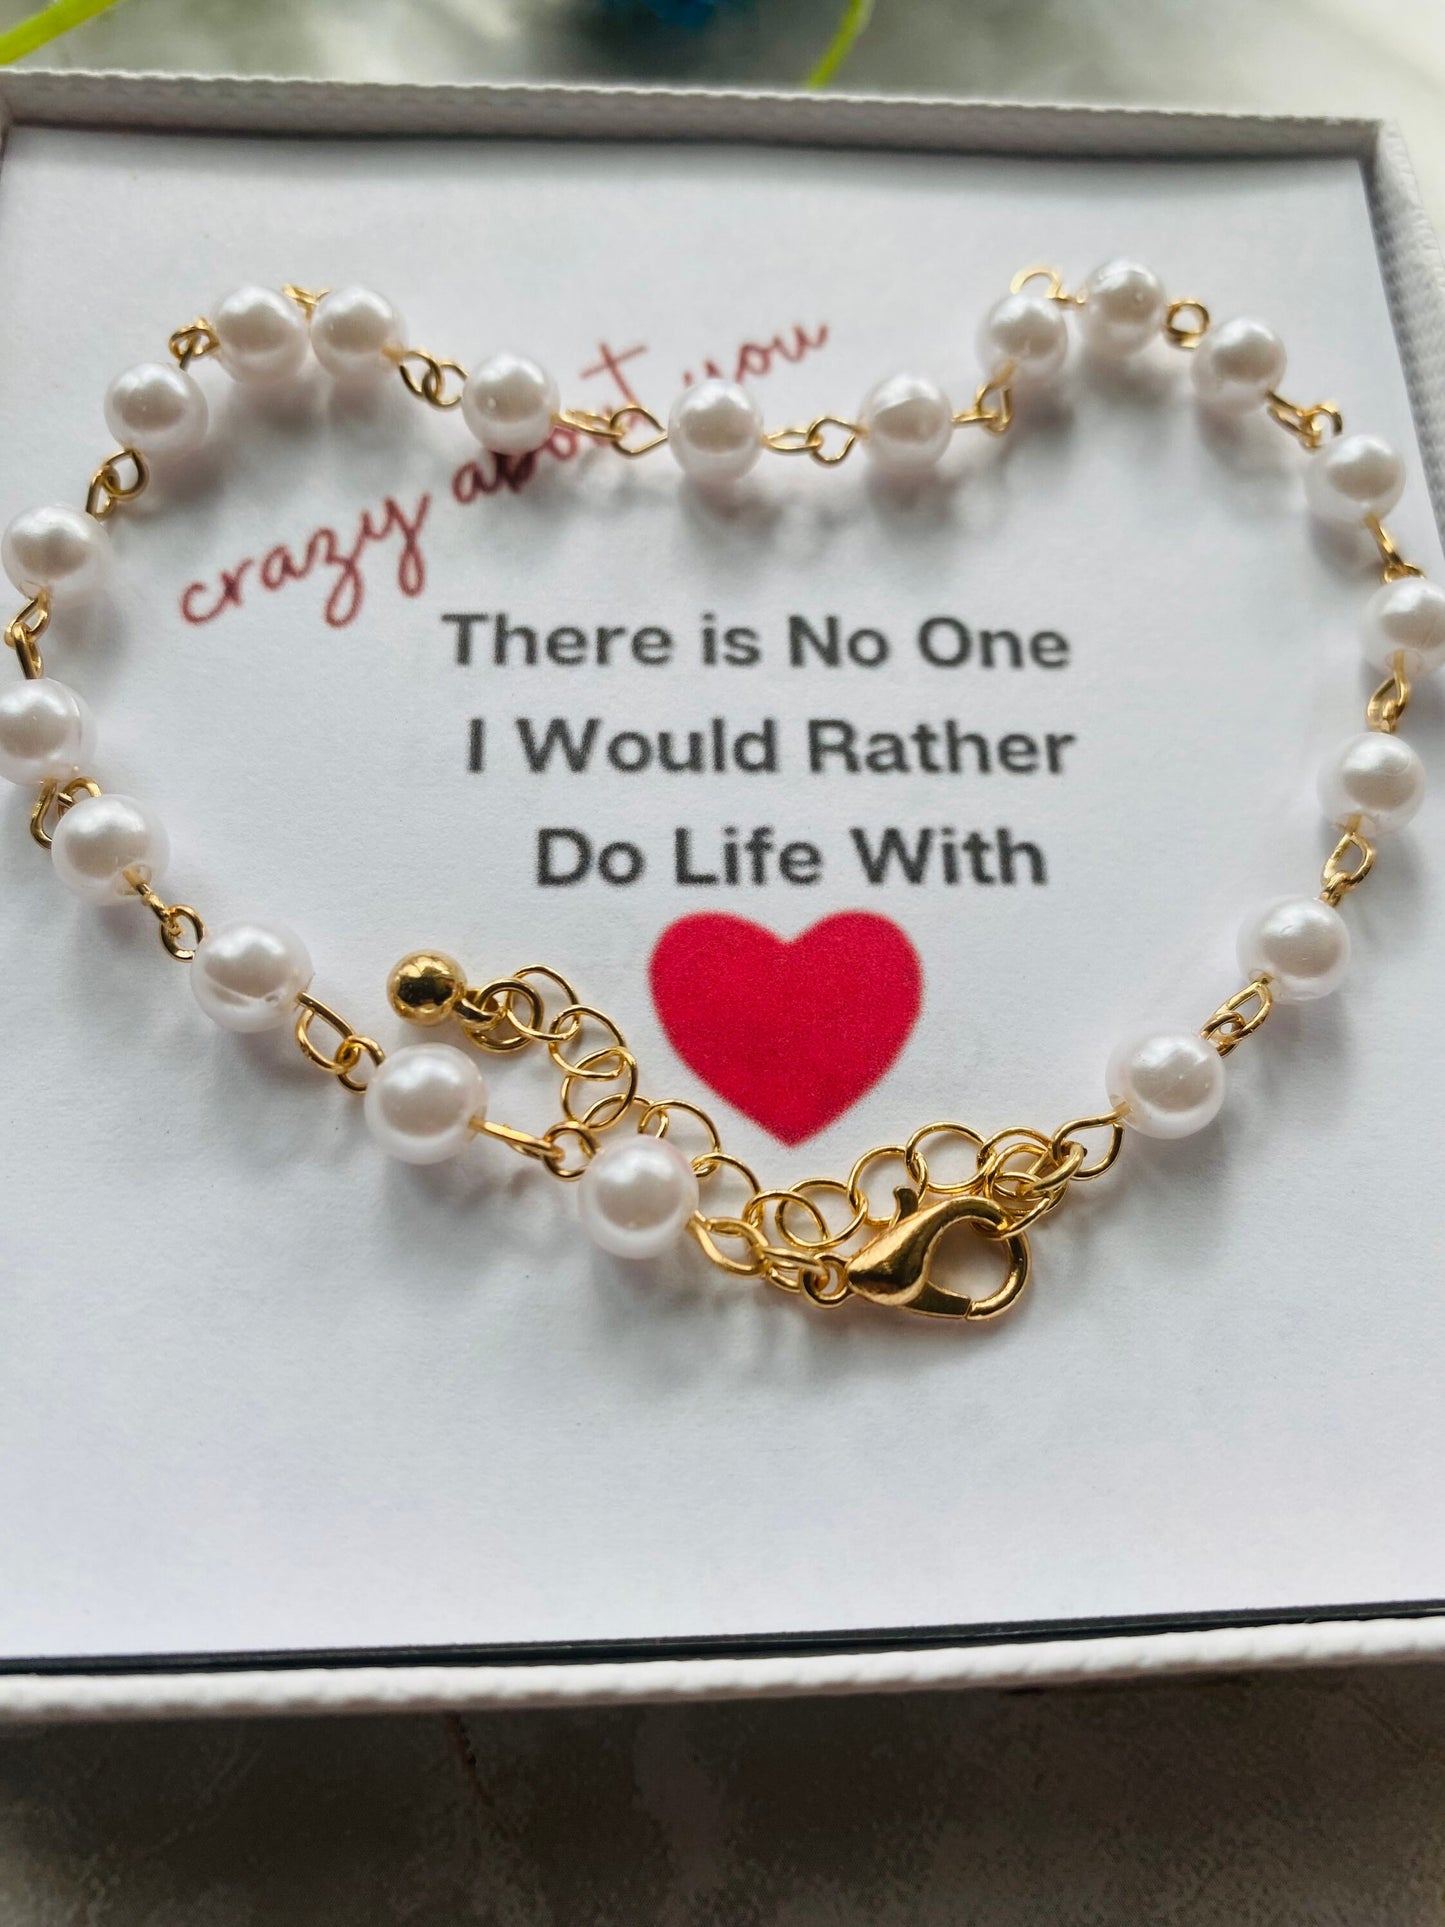 Romantic birthday gift for wife with message card jewelry for girlfriend last minute gift idea same day ship